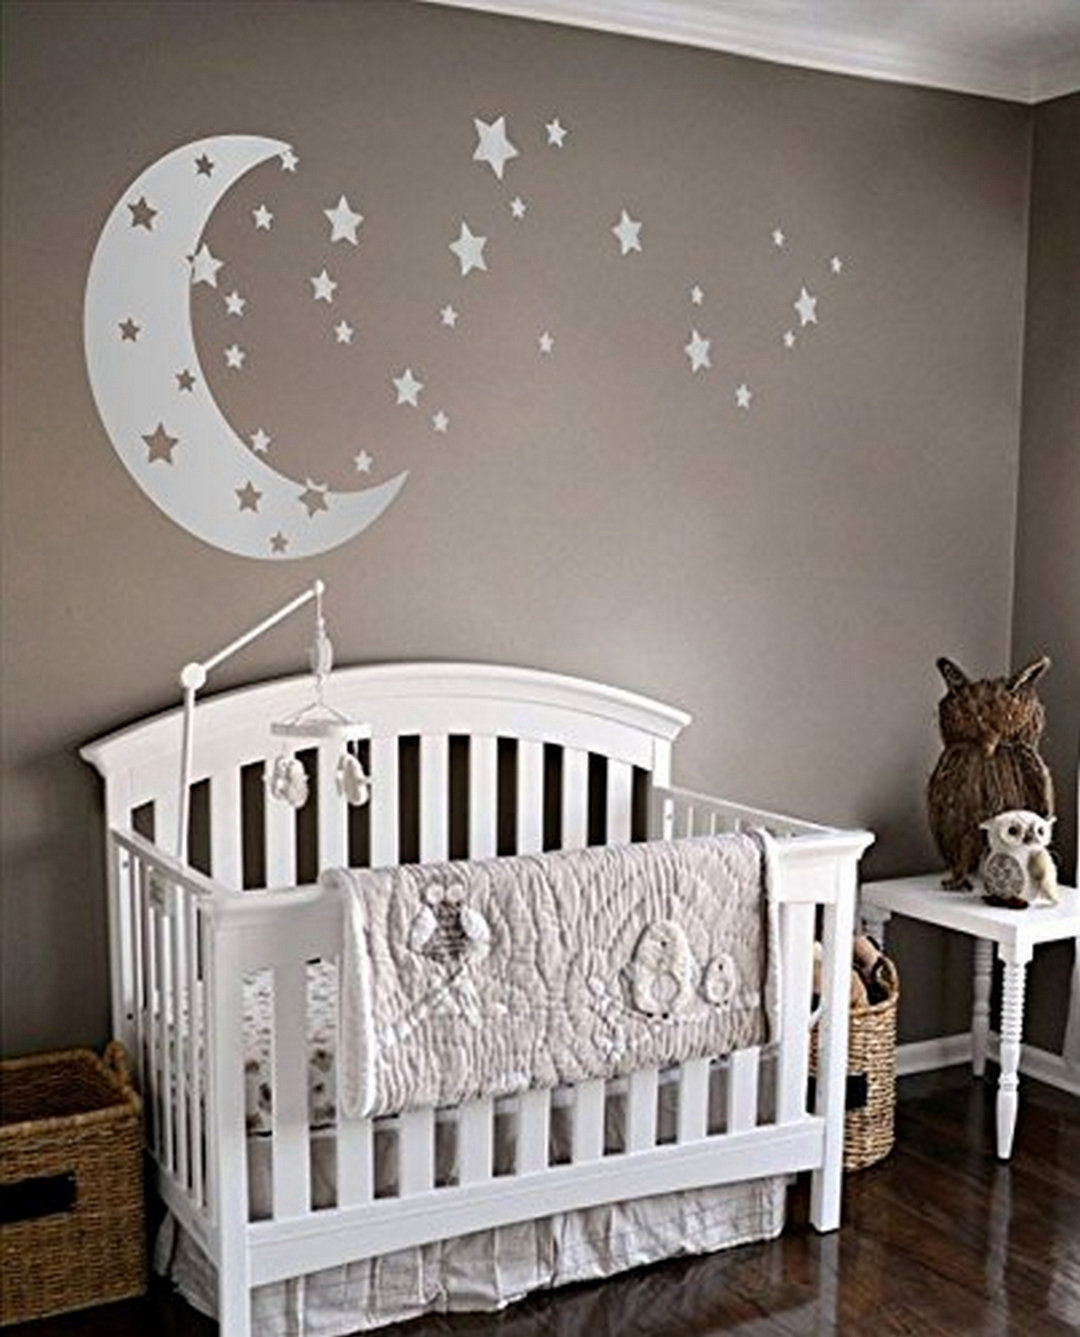 Baby Room Wall Decoration Ideas
 Moonee Pond Gable House A New Modern House with A Walled